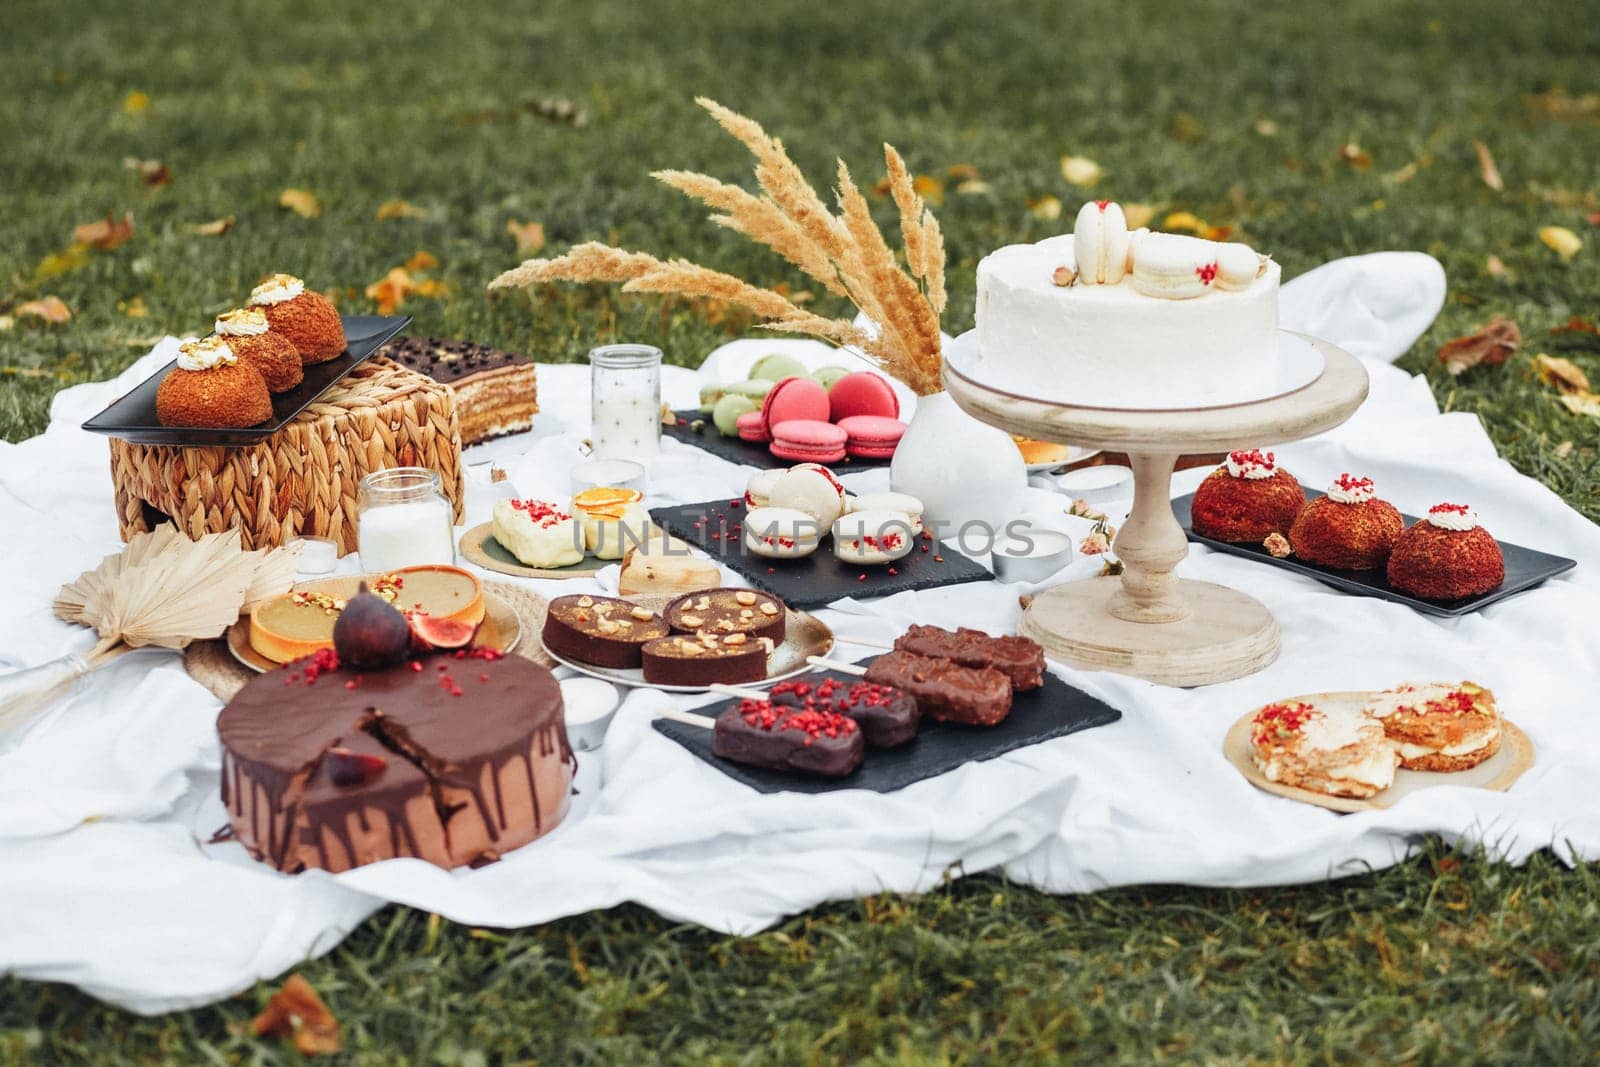 A variety of decadent desserts laid out on a picnic blanket in a tempting display of sweet treats.